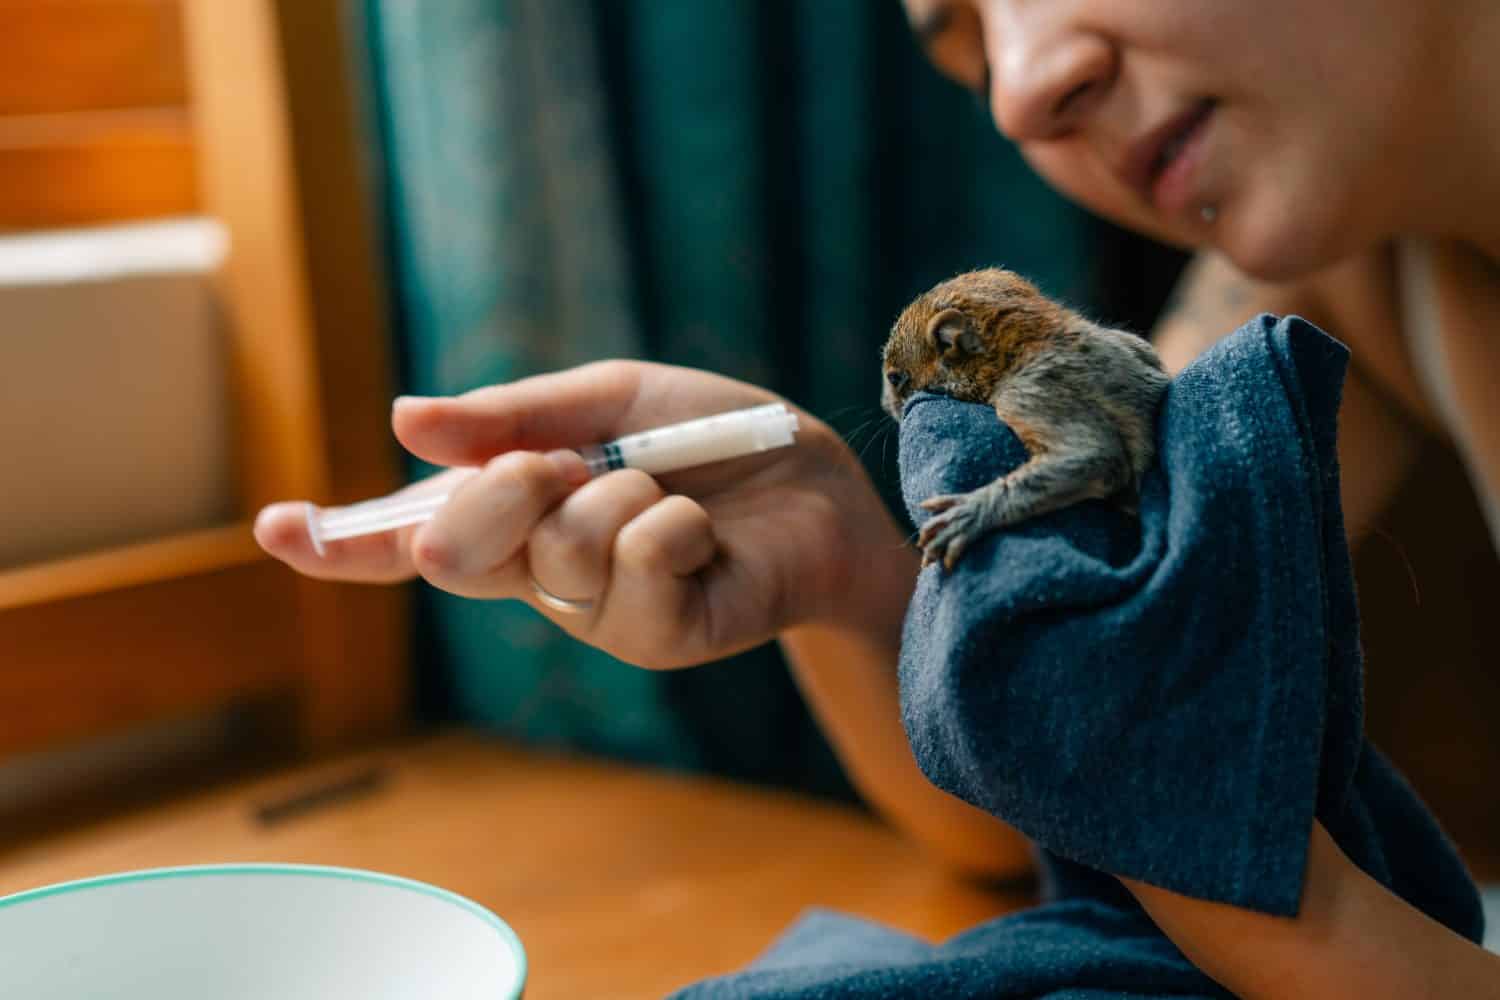 a baby squirrel drinking milk from a syringe. High quality photo